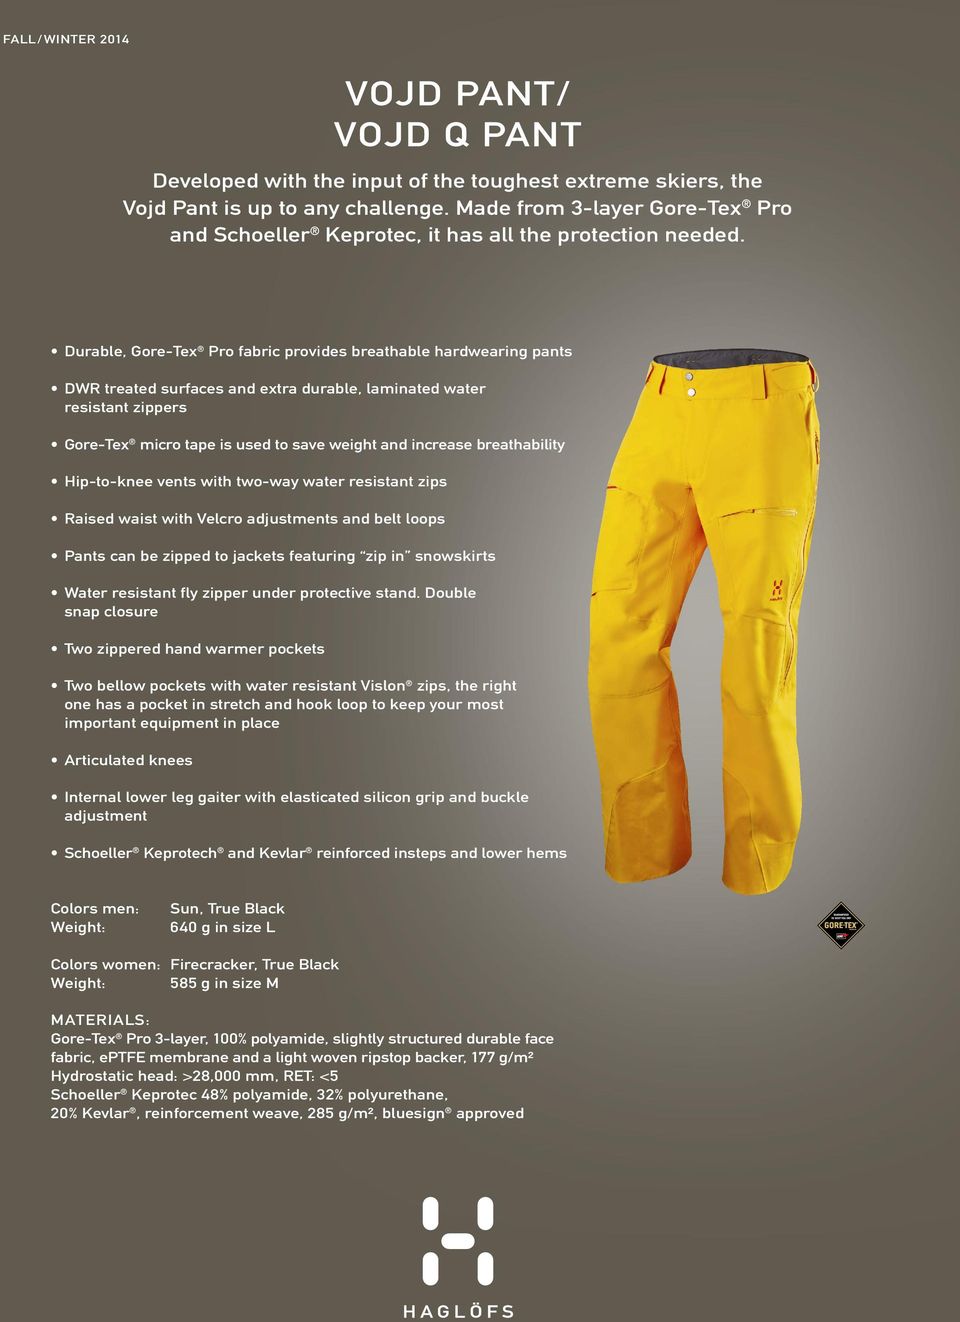 Durable, Gore-Tex Pro fabric provides breathable hardwearing pants DWR treated surfaces and extra durable, laminated water resistant zippers Gore-Tex micro tape is used to save weight and increase